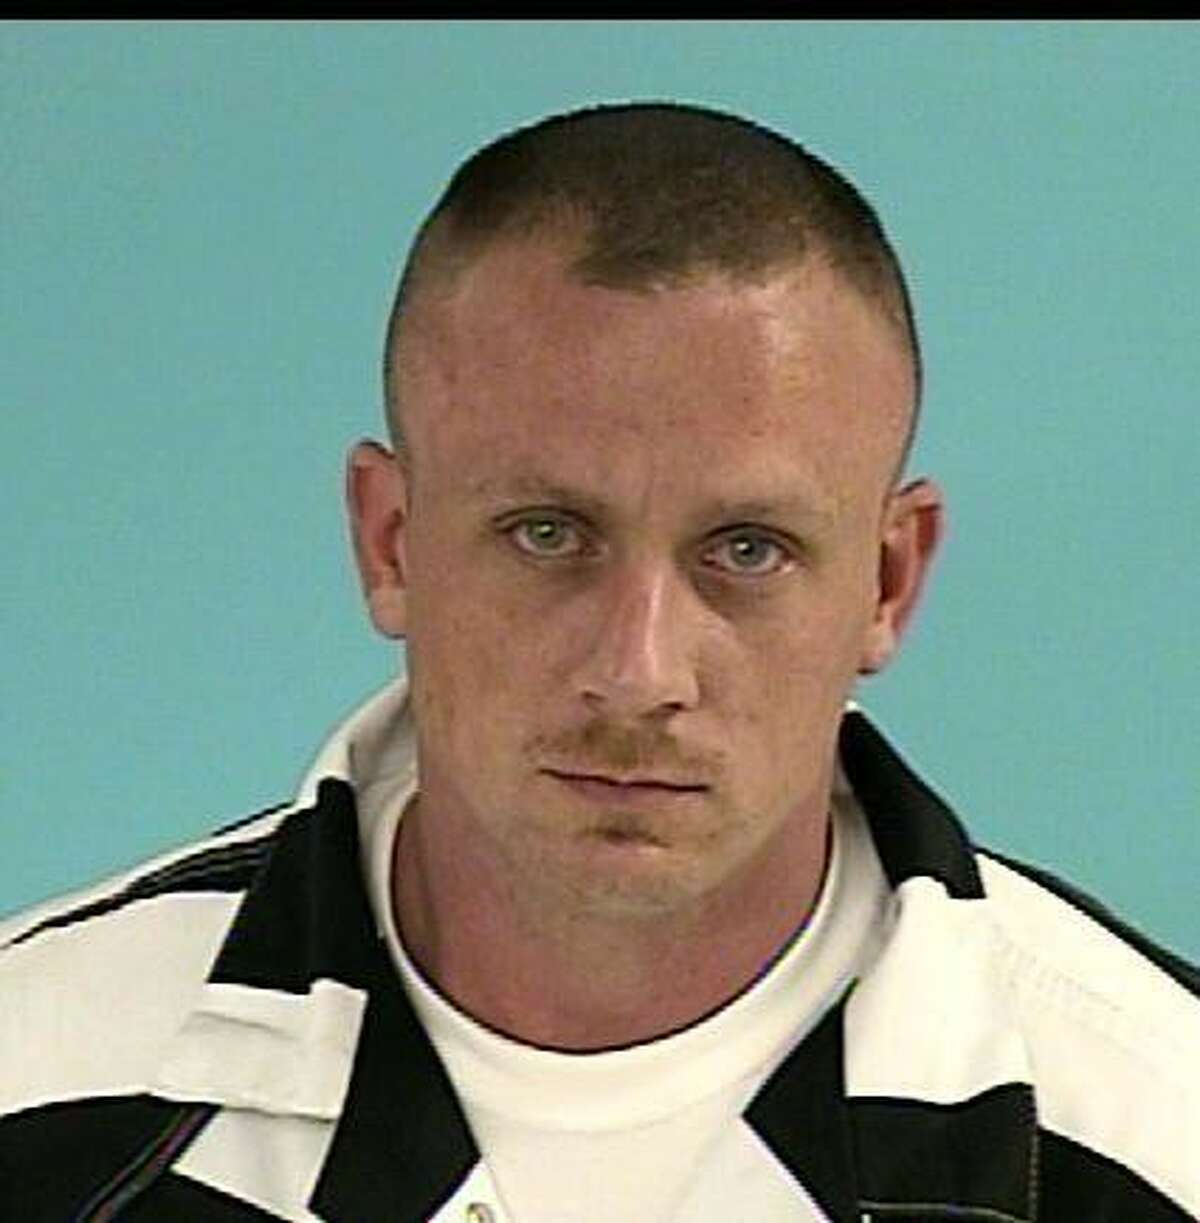 BAKER, Michael ShaneWhite/Male DOB: 09/12/1981Height: 5’10” Weight: 170 lbs.Hair: Brown Eyes: BlueWarrant: # 120808736 CapiasUUMV/Theft of Materials/CopperLKA: Homeless.